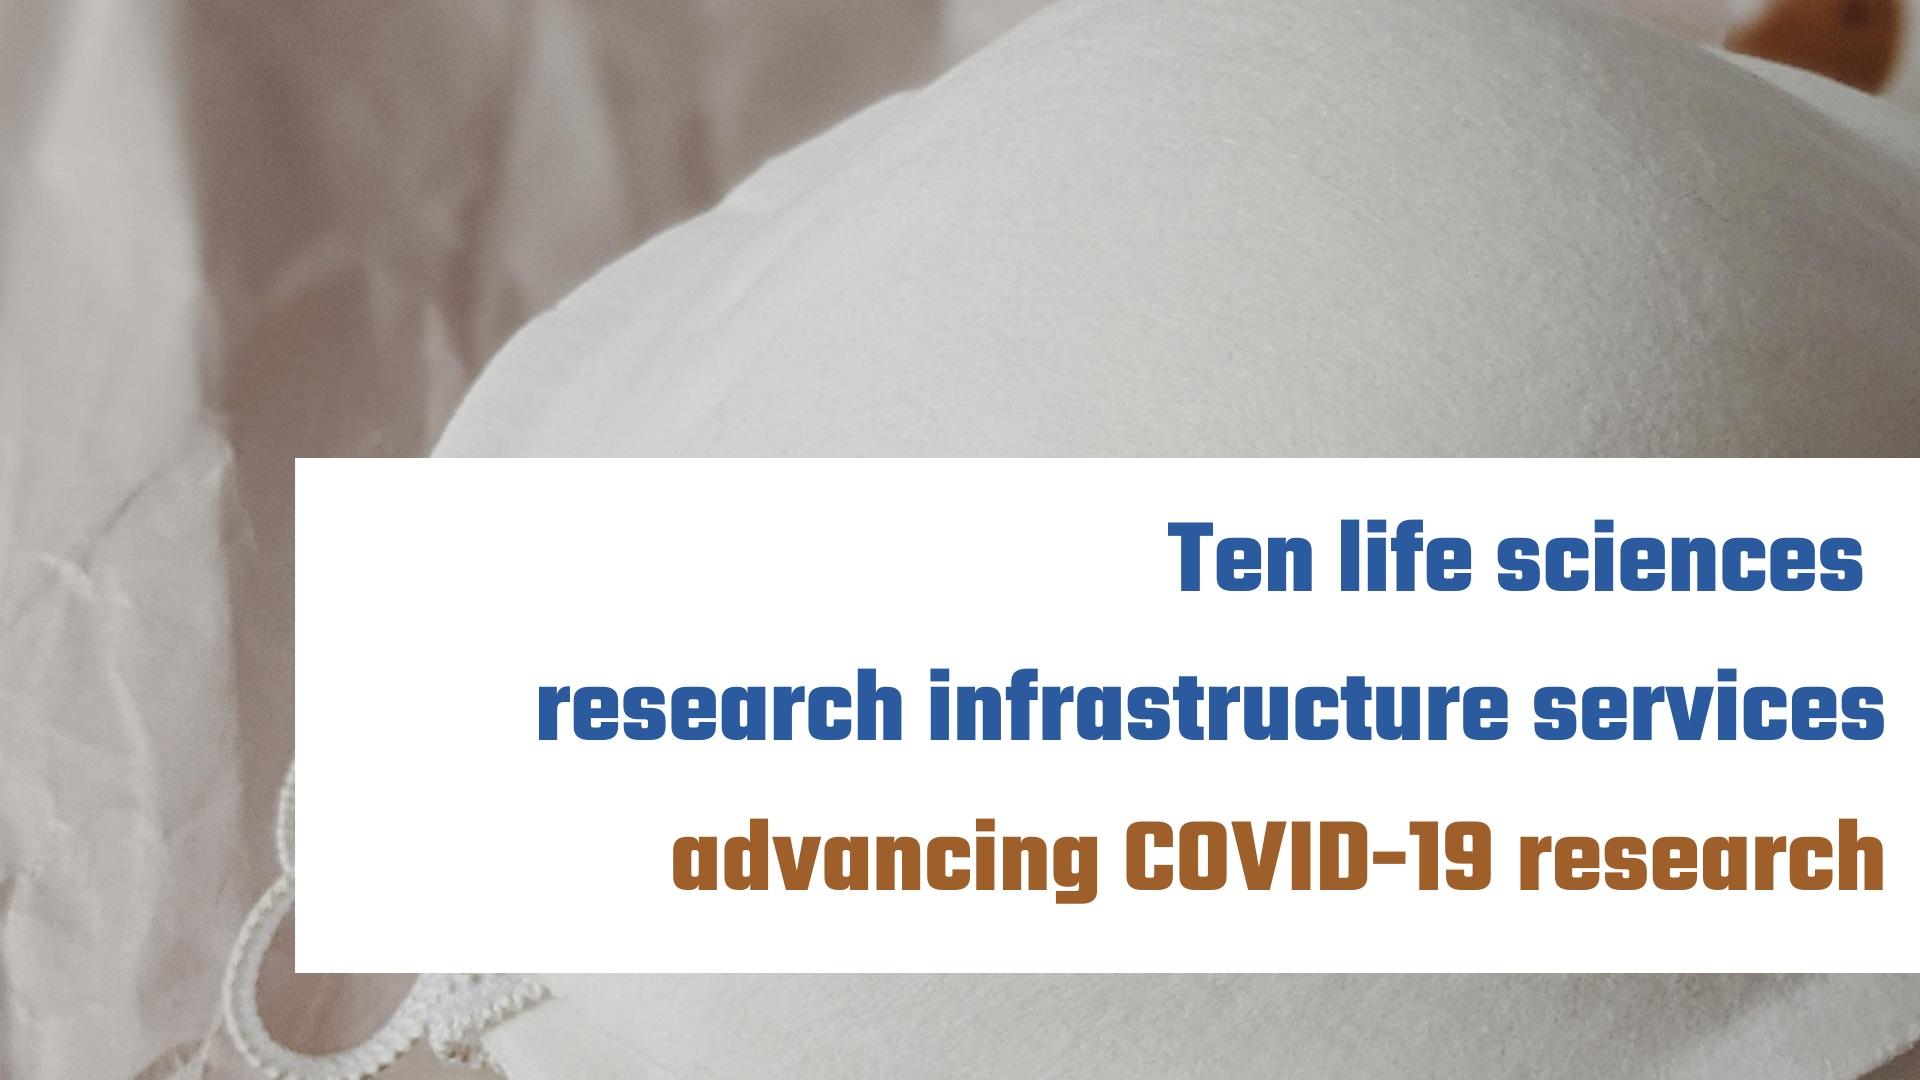 Ten life sciences research infrastructure services advancing COVID-19 research